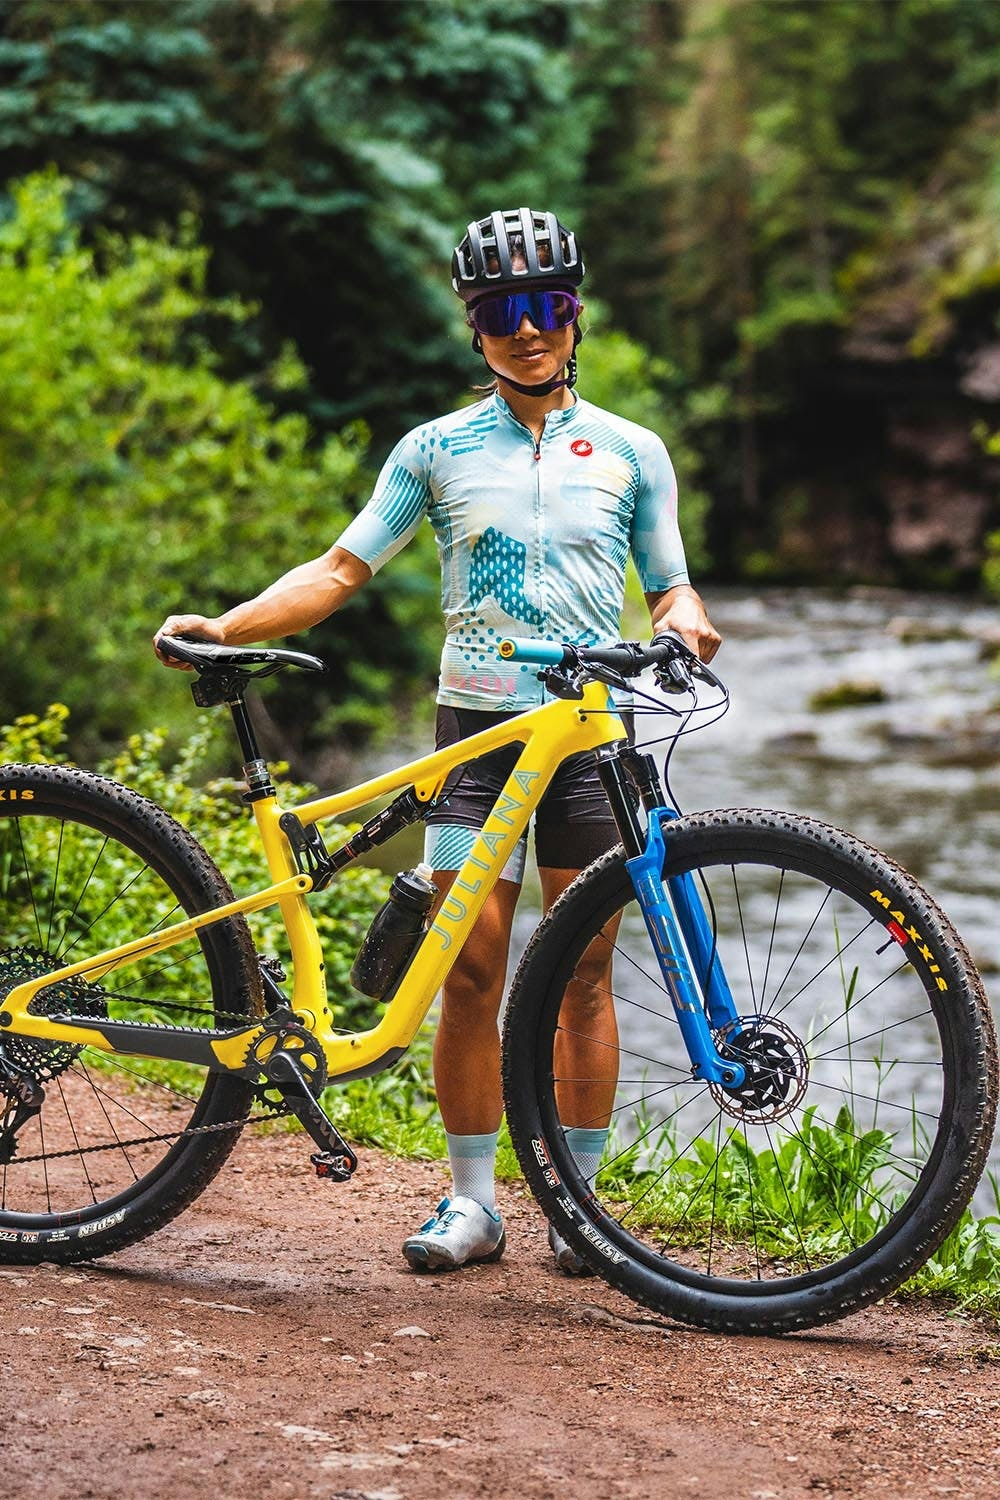 Juliana Bicycles Pro XC Rider - Evelyn Dong standing with her Wilder X01 AXS RSV Full Suspension Mountain bike